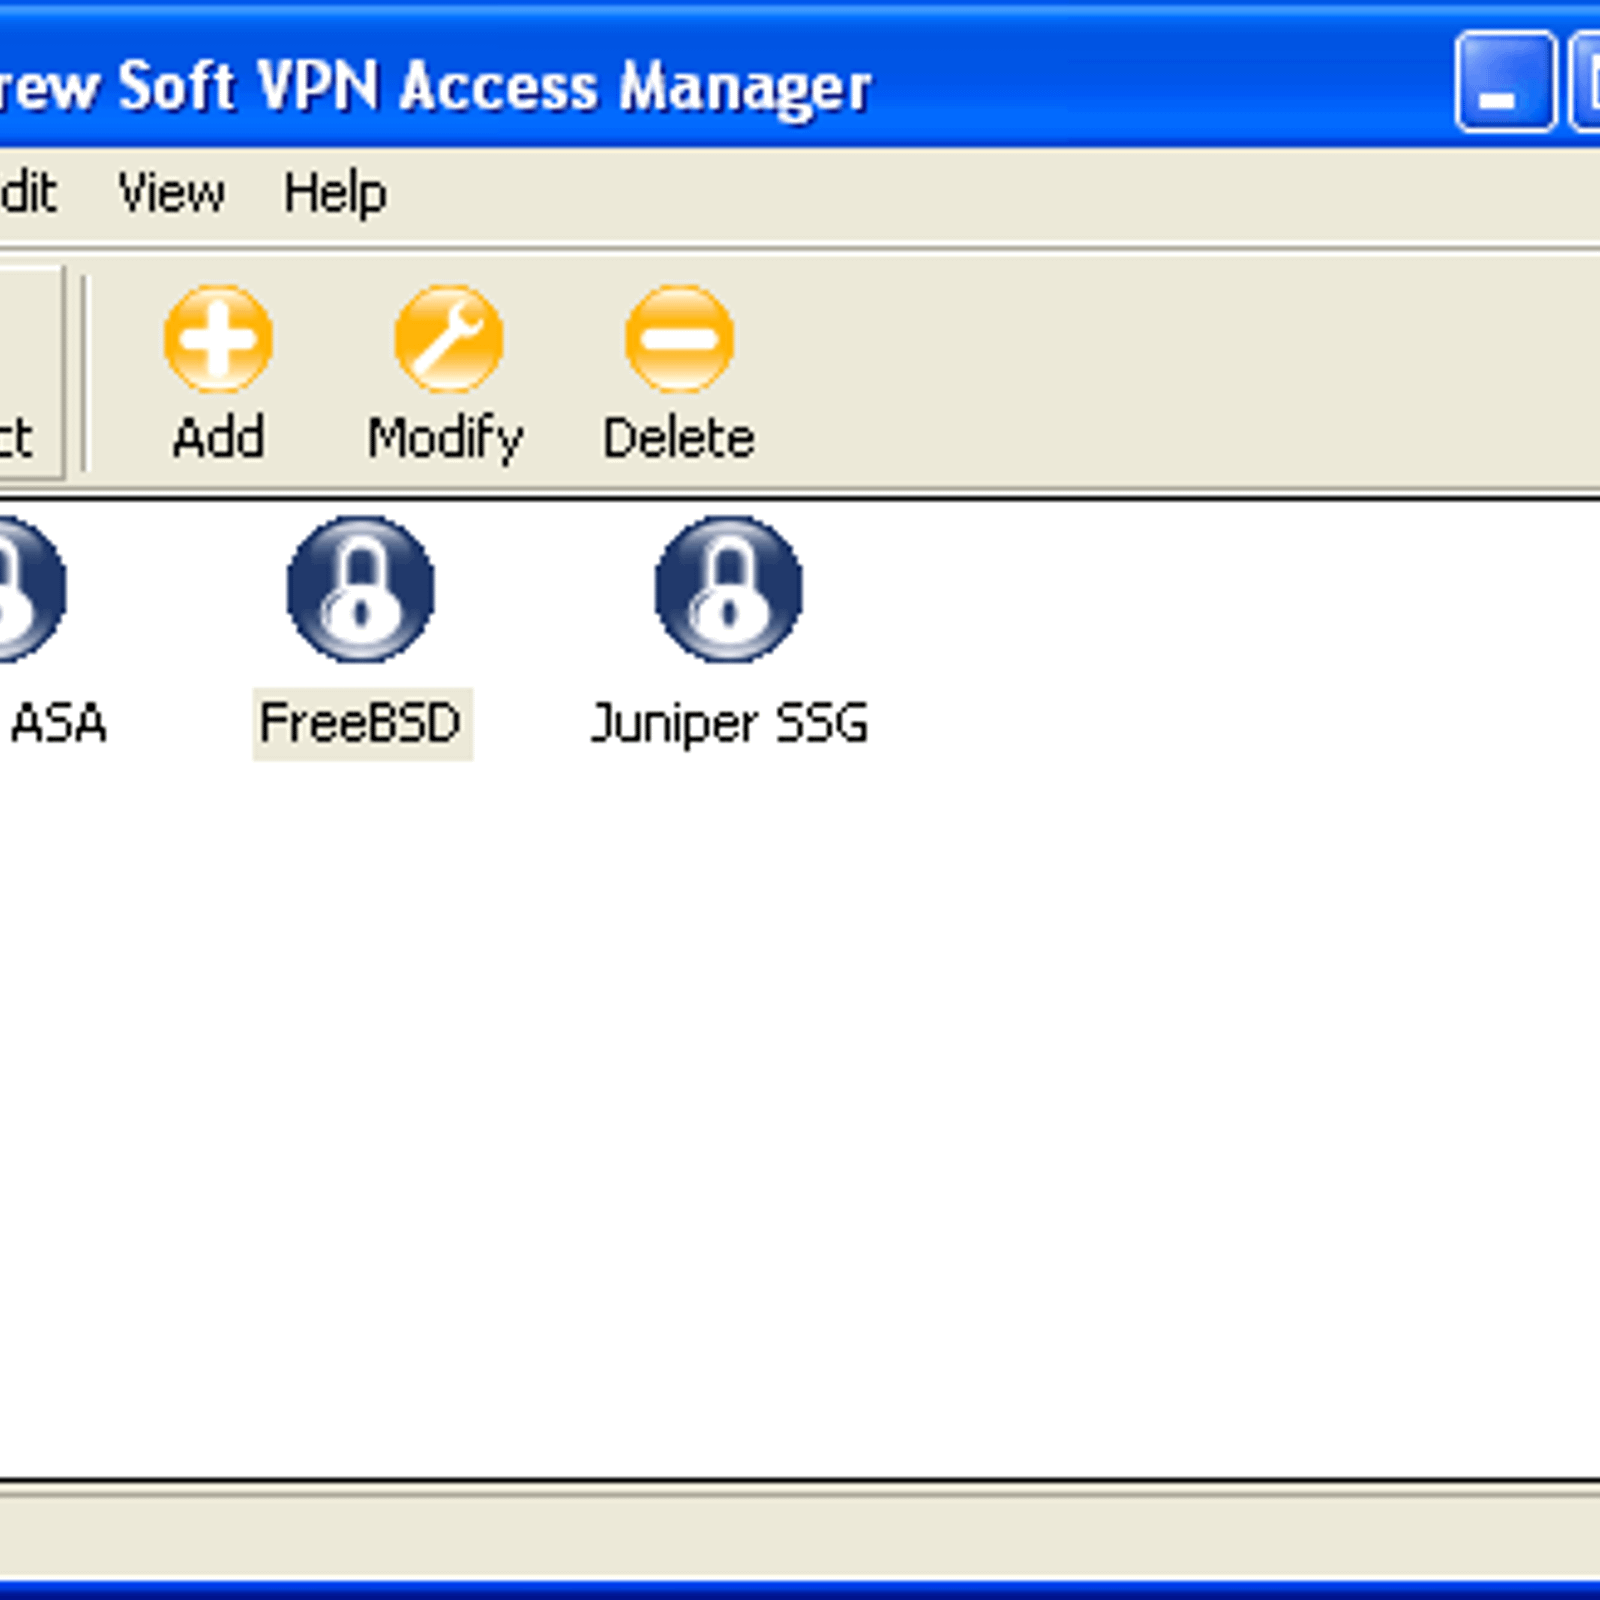 Shrew soft vpn access manager for windows 10